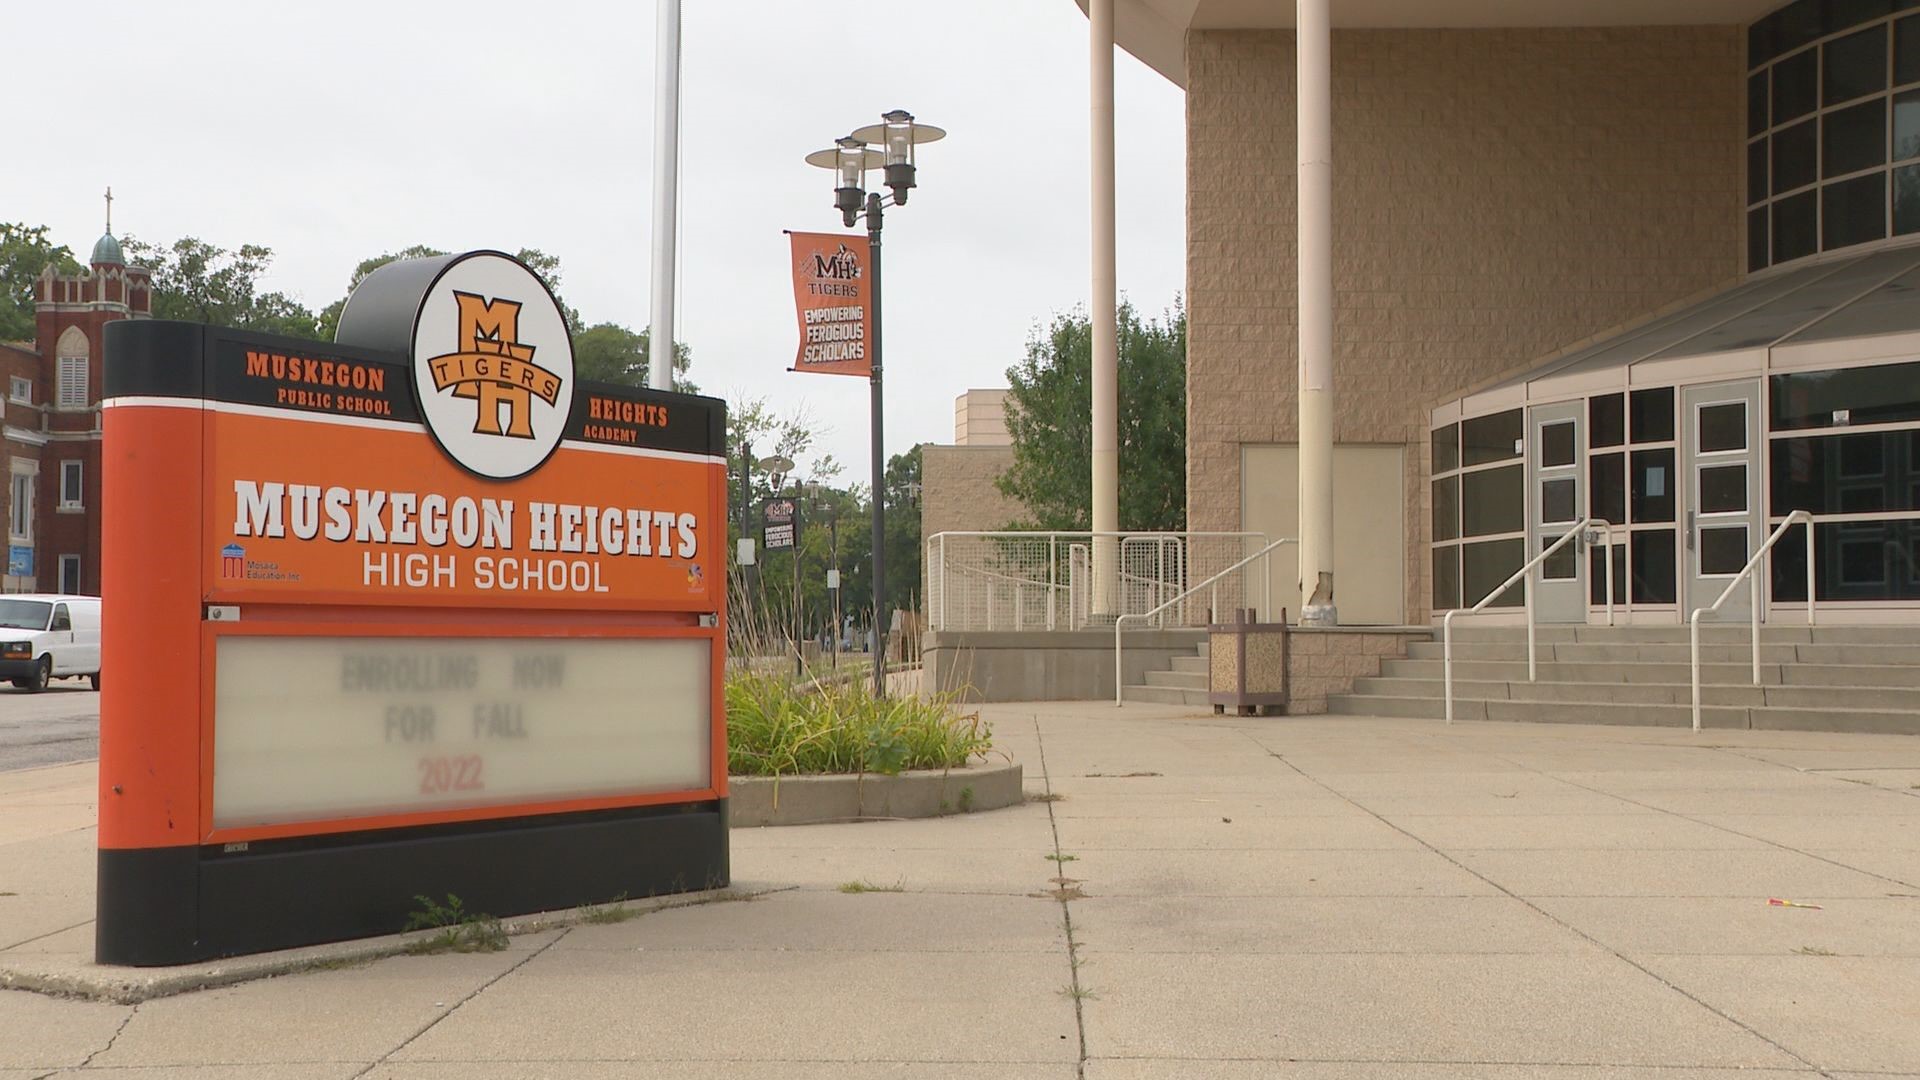 After a contentious meeting, Muskegon Heights school officials are setting a new timeline for getting the district back on track.